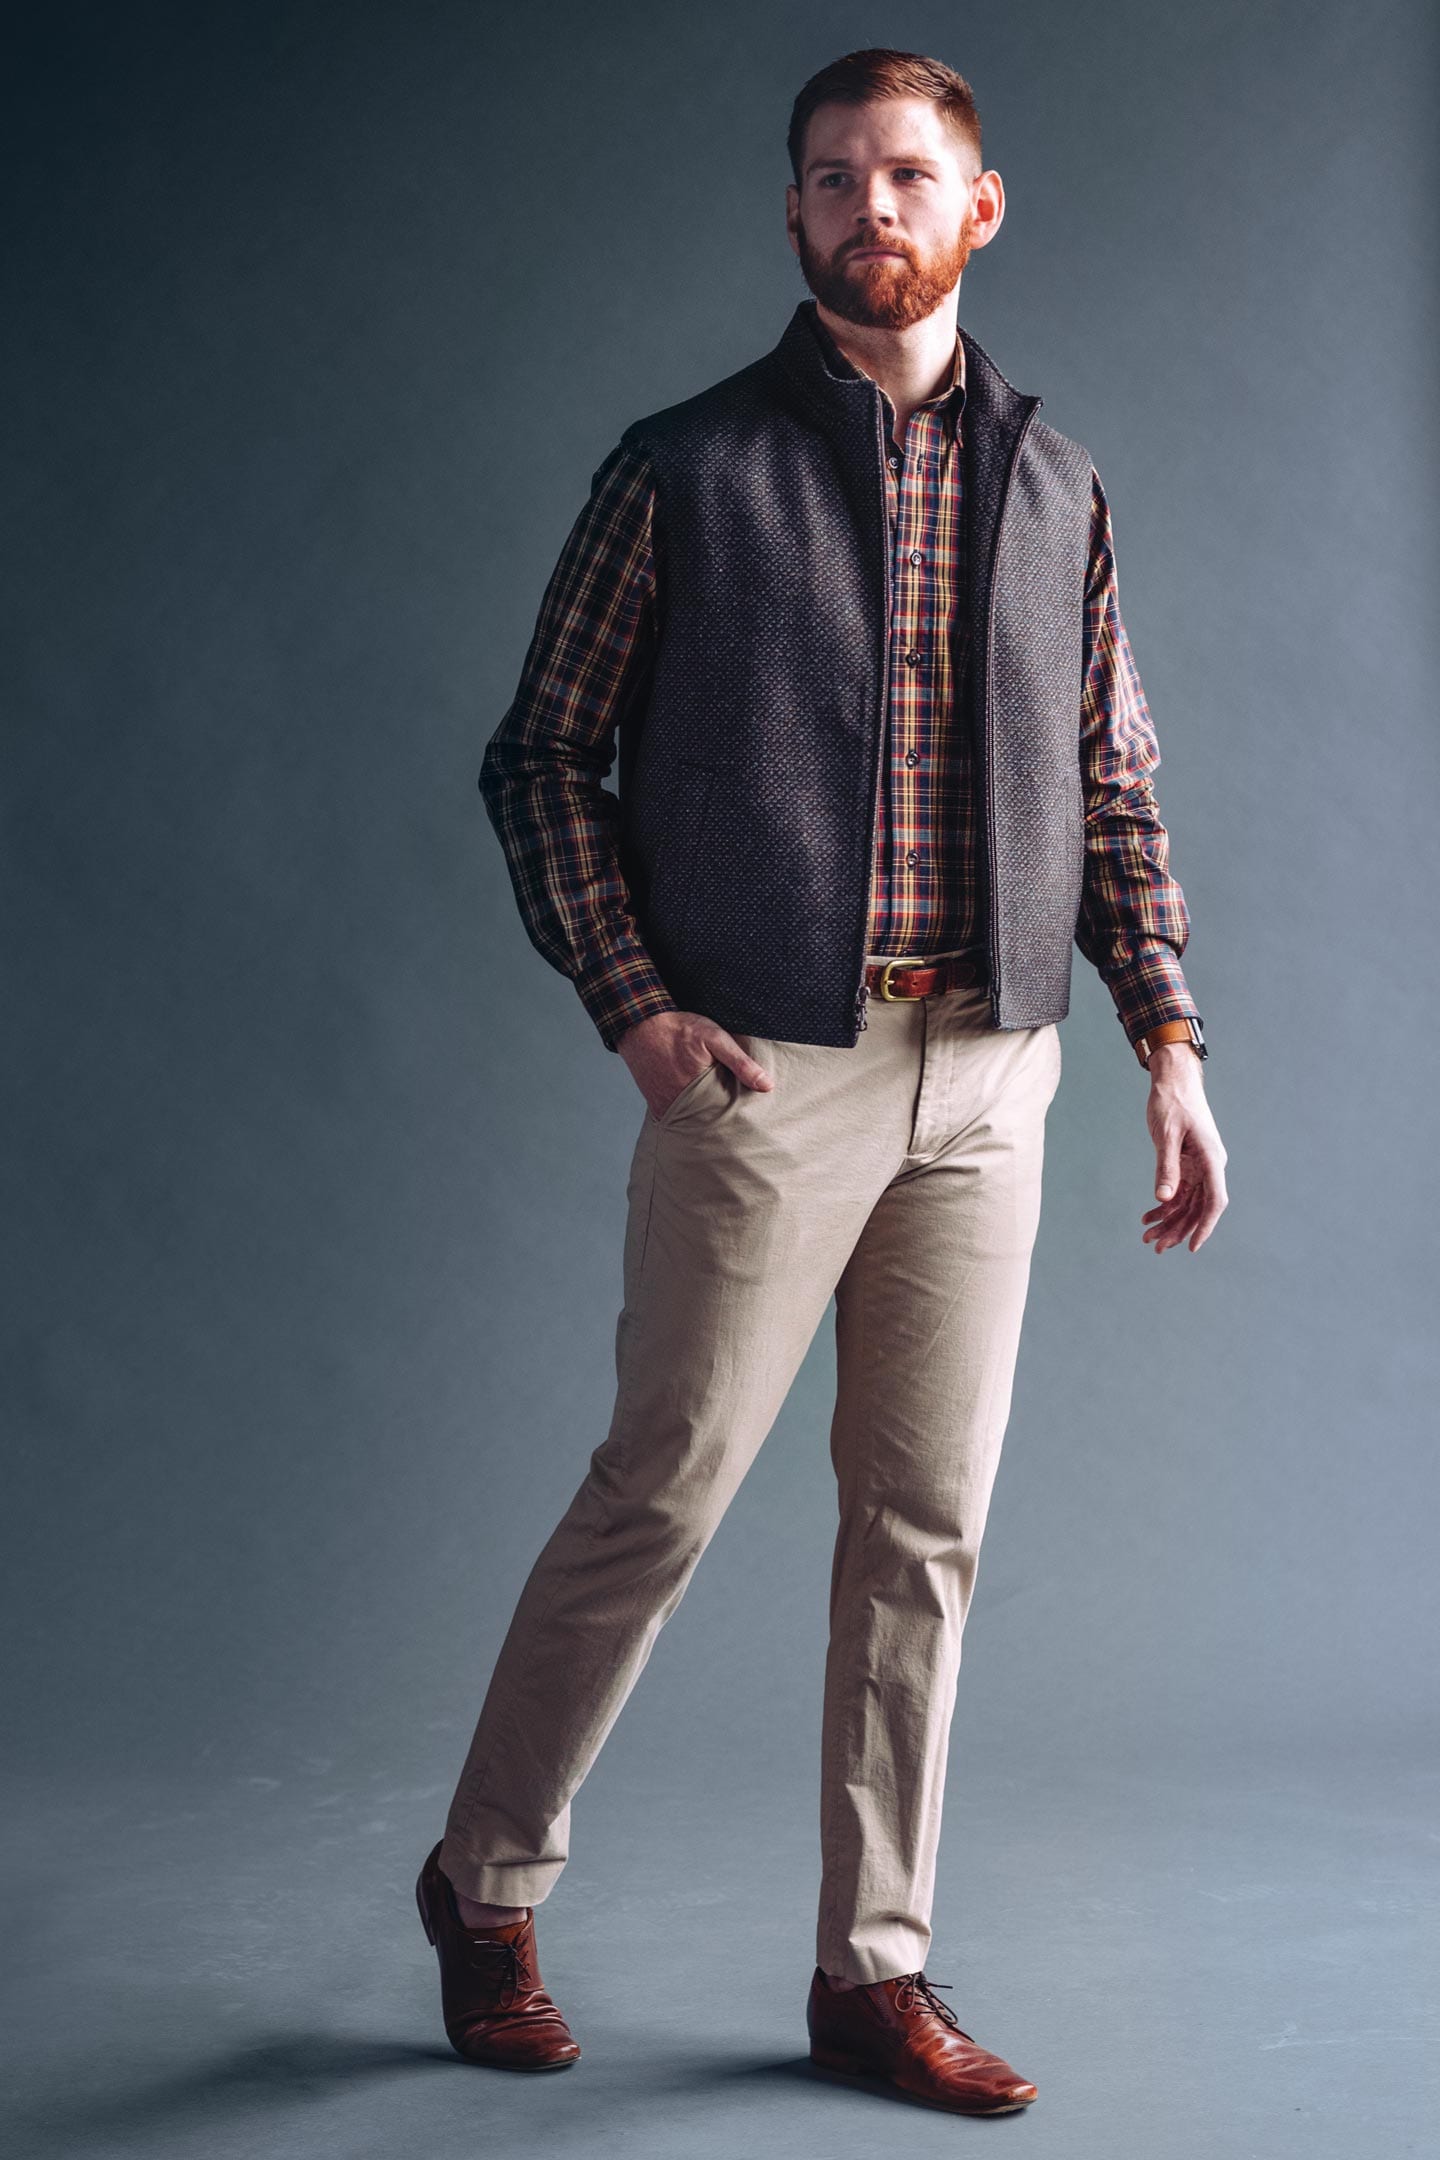 Natural Fiber Clothing for Dads from Bruce Baird and Co in Chattanooga